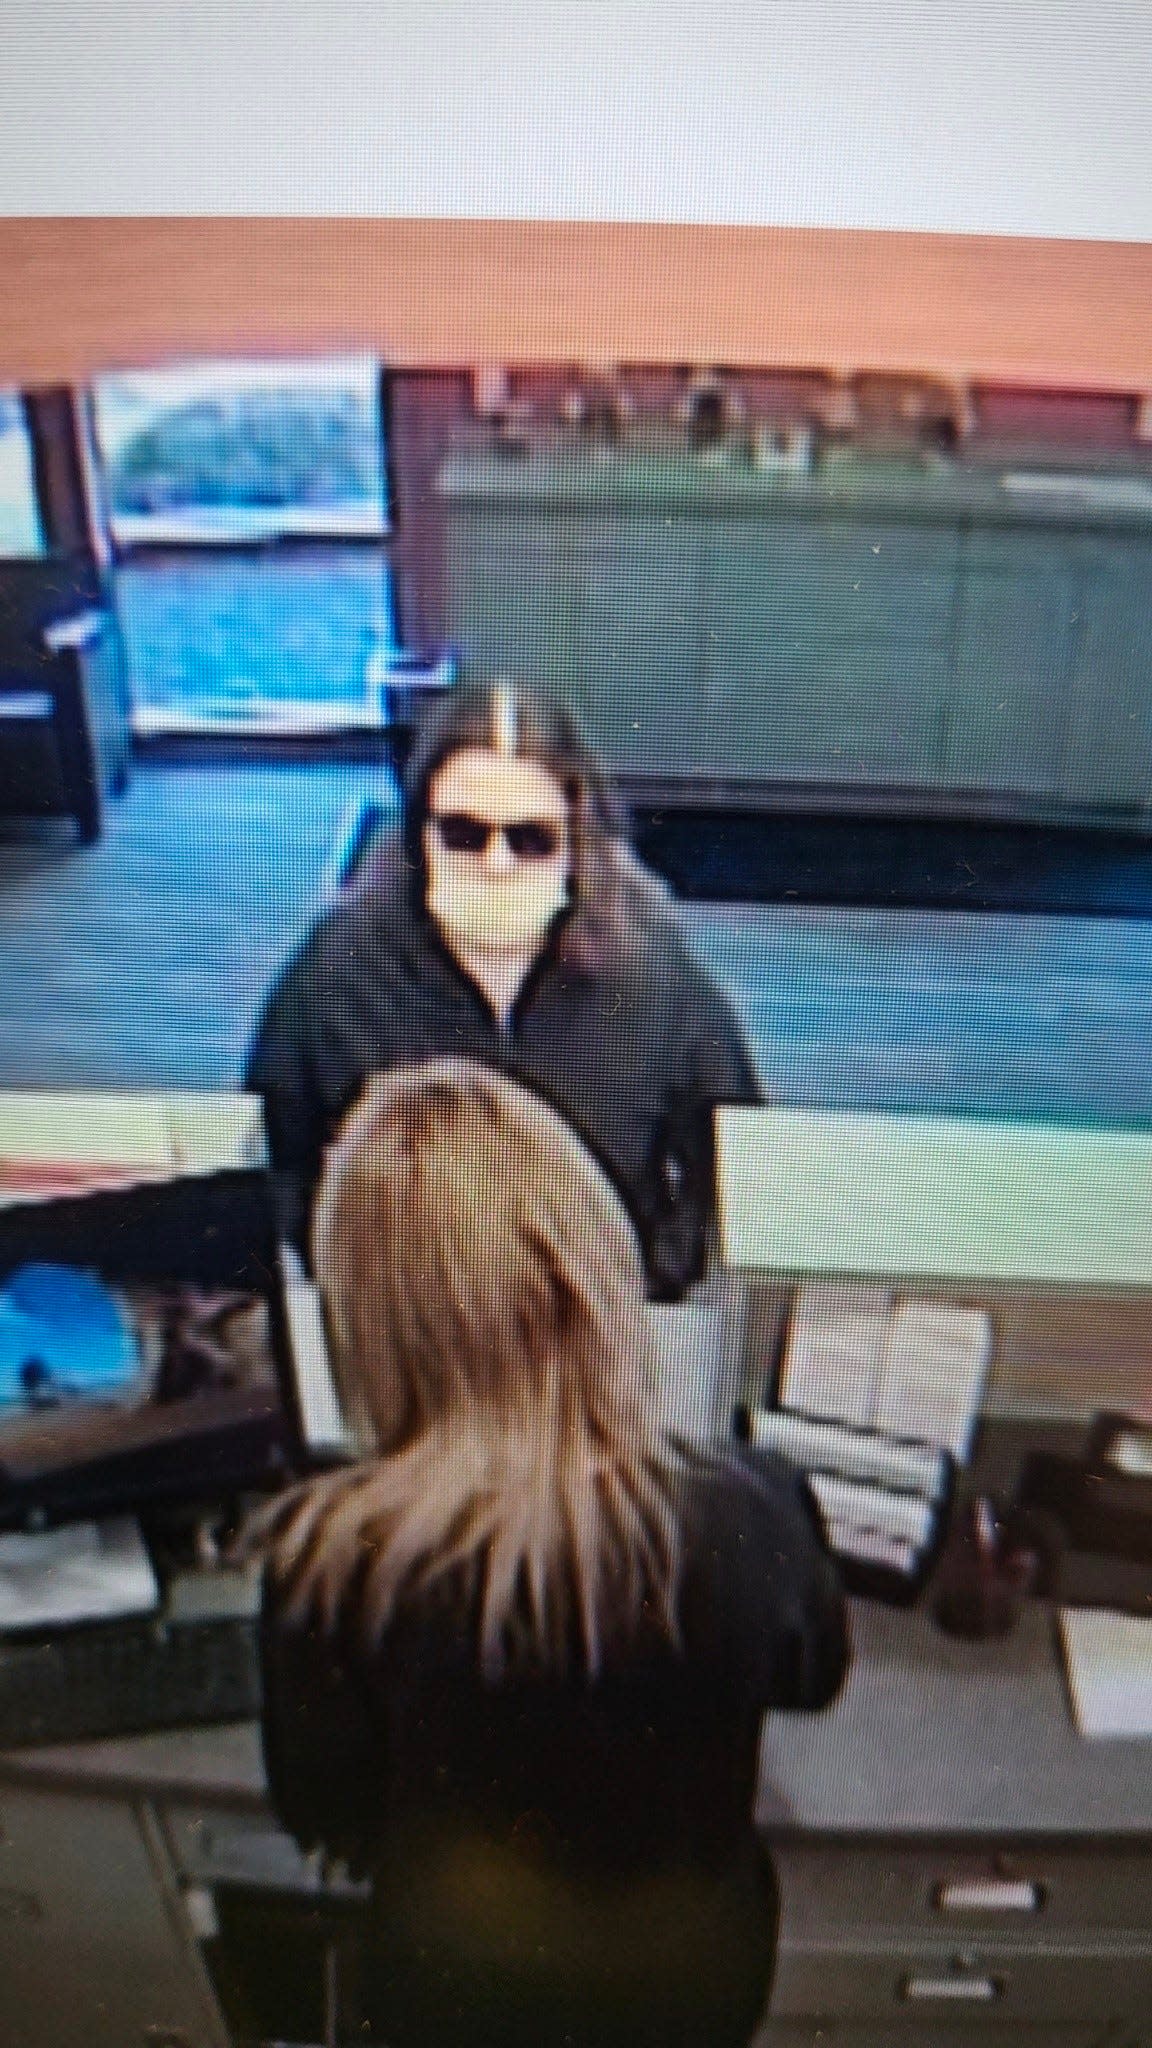 The Stark County Sheriff's Office on Thursday released this photo of a woman accused of robbing the First Commonwealth Bank at Oakwood Square in Plain Township.